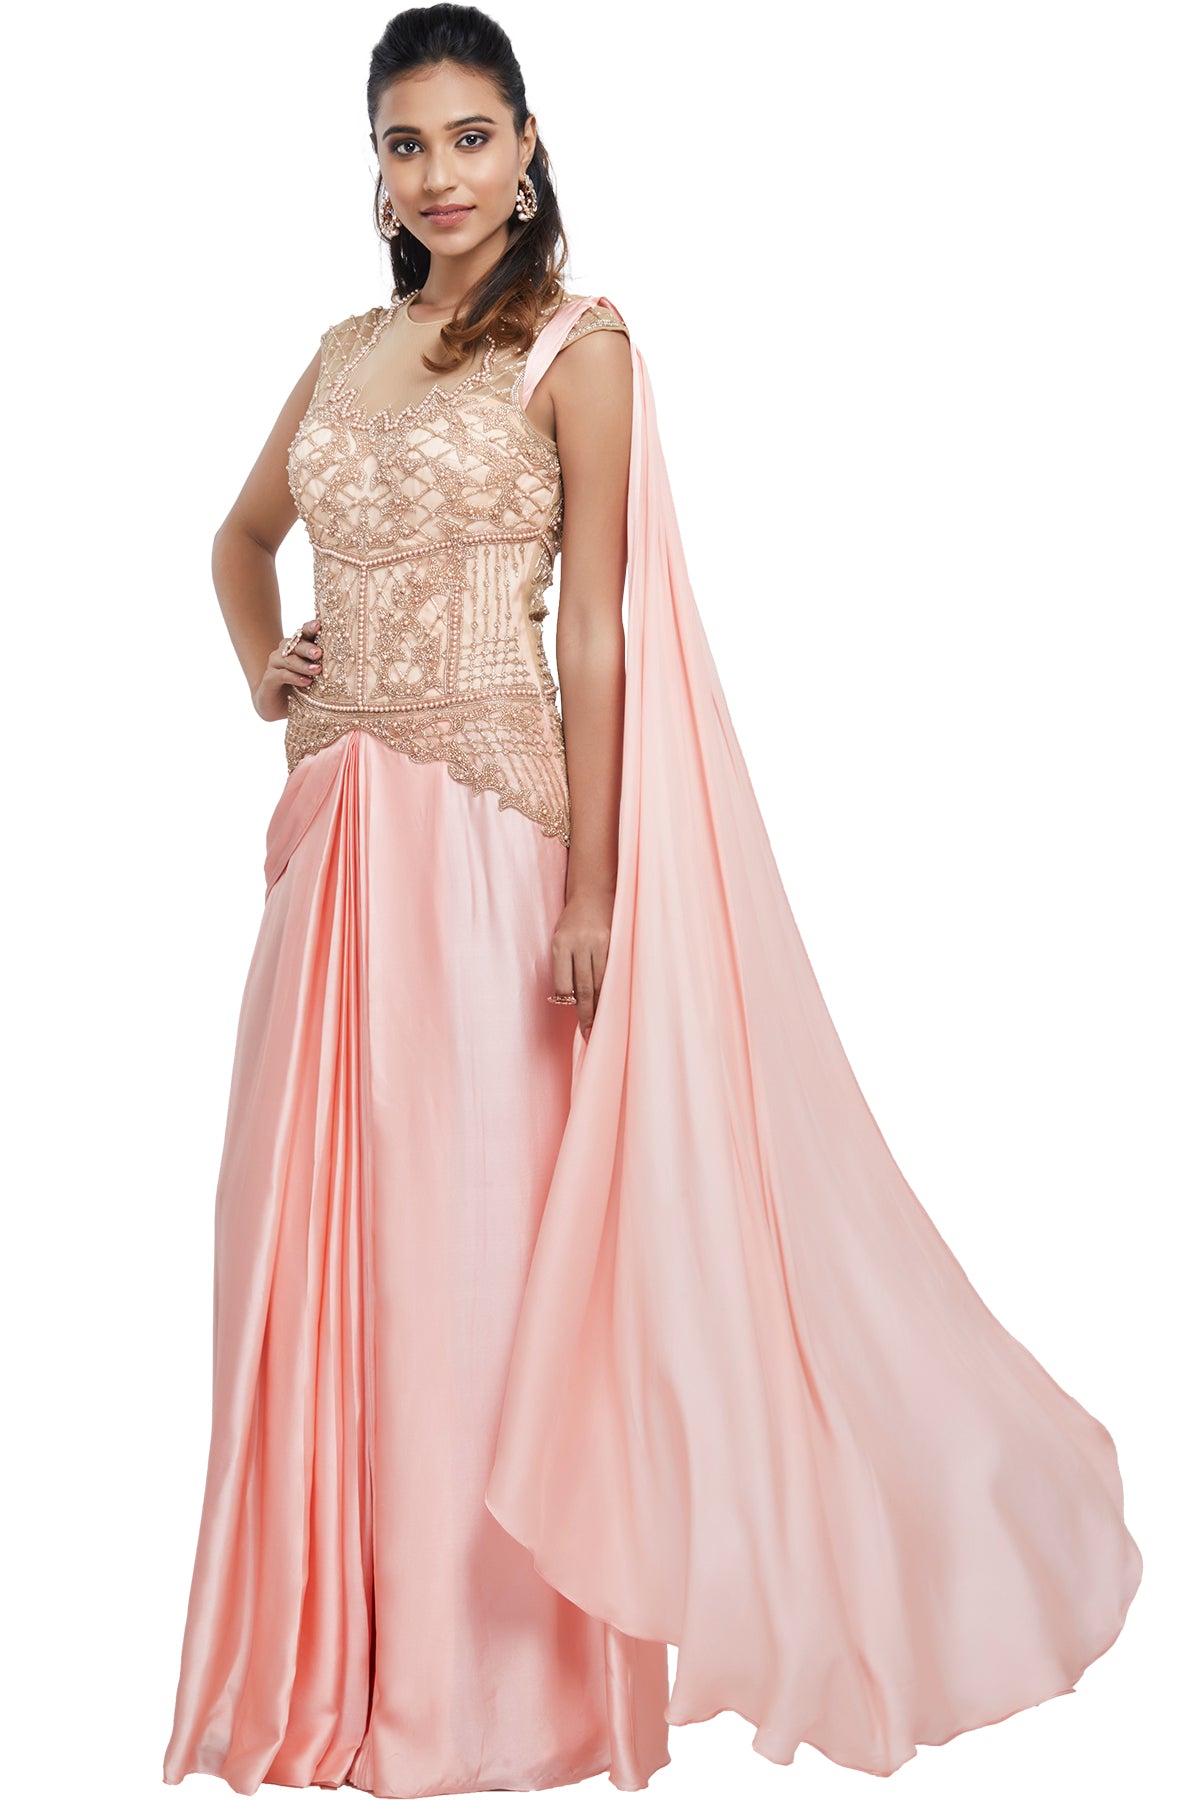 Rose Pink Bridal Satin Embroidered Gown With Cape Design by Sonaakshi Raaj  at Pernia's Pop Up Shop 2024